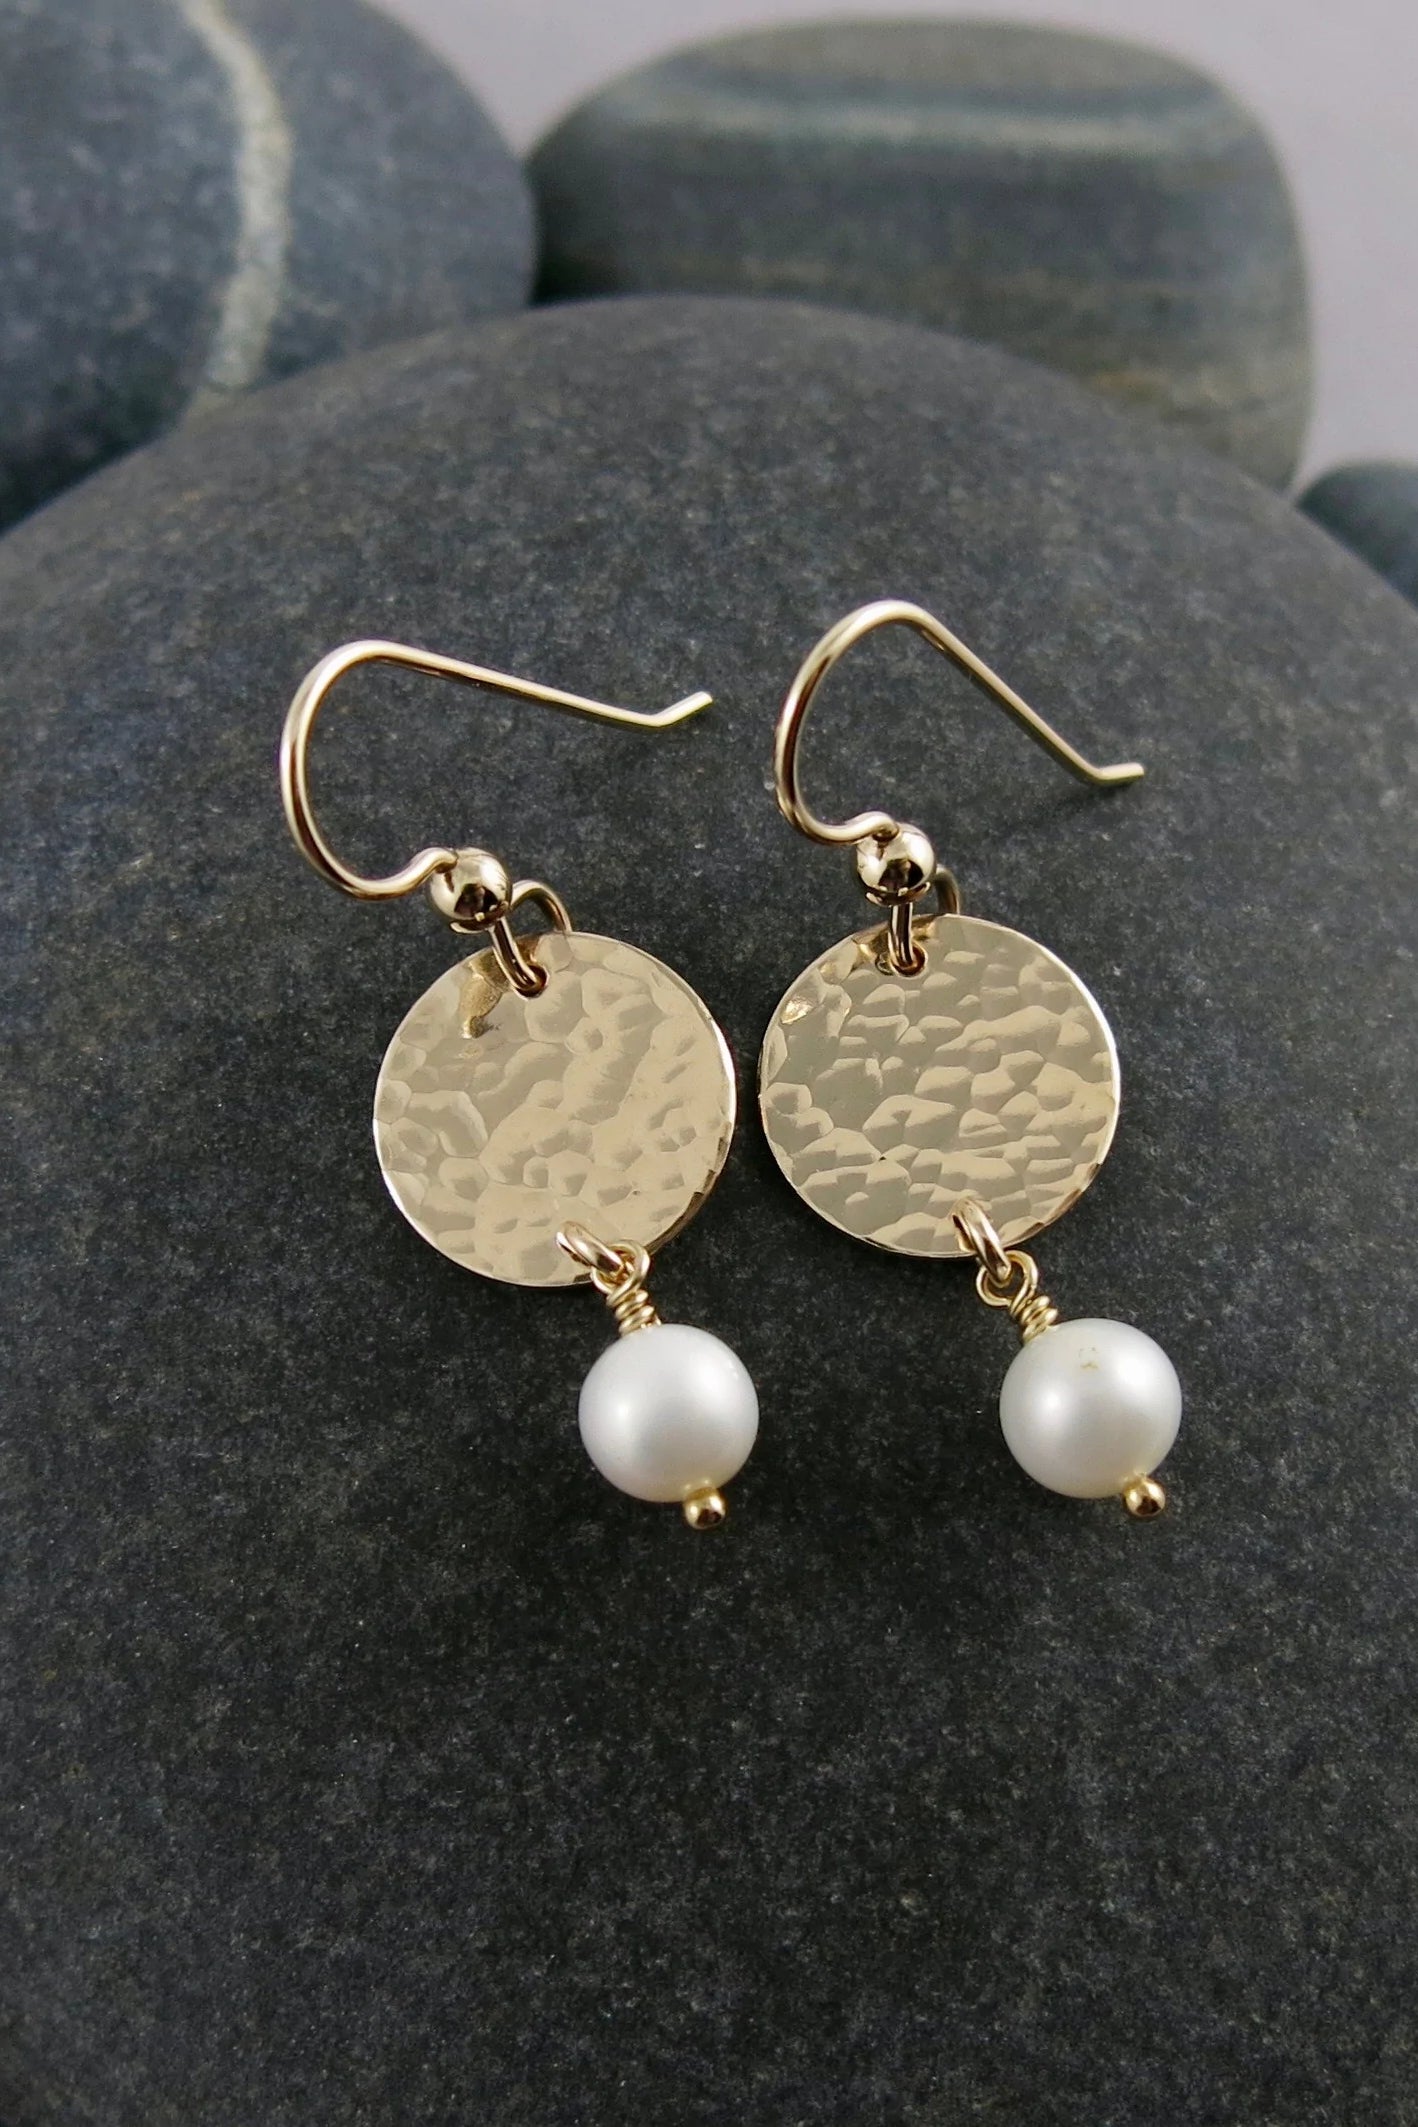 Pearl Moondrop Earrings - White Freshwater Pearls and 14k gold-fill by Mikel Grant, made in Sechelt BC